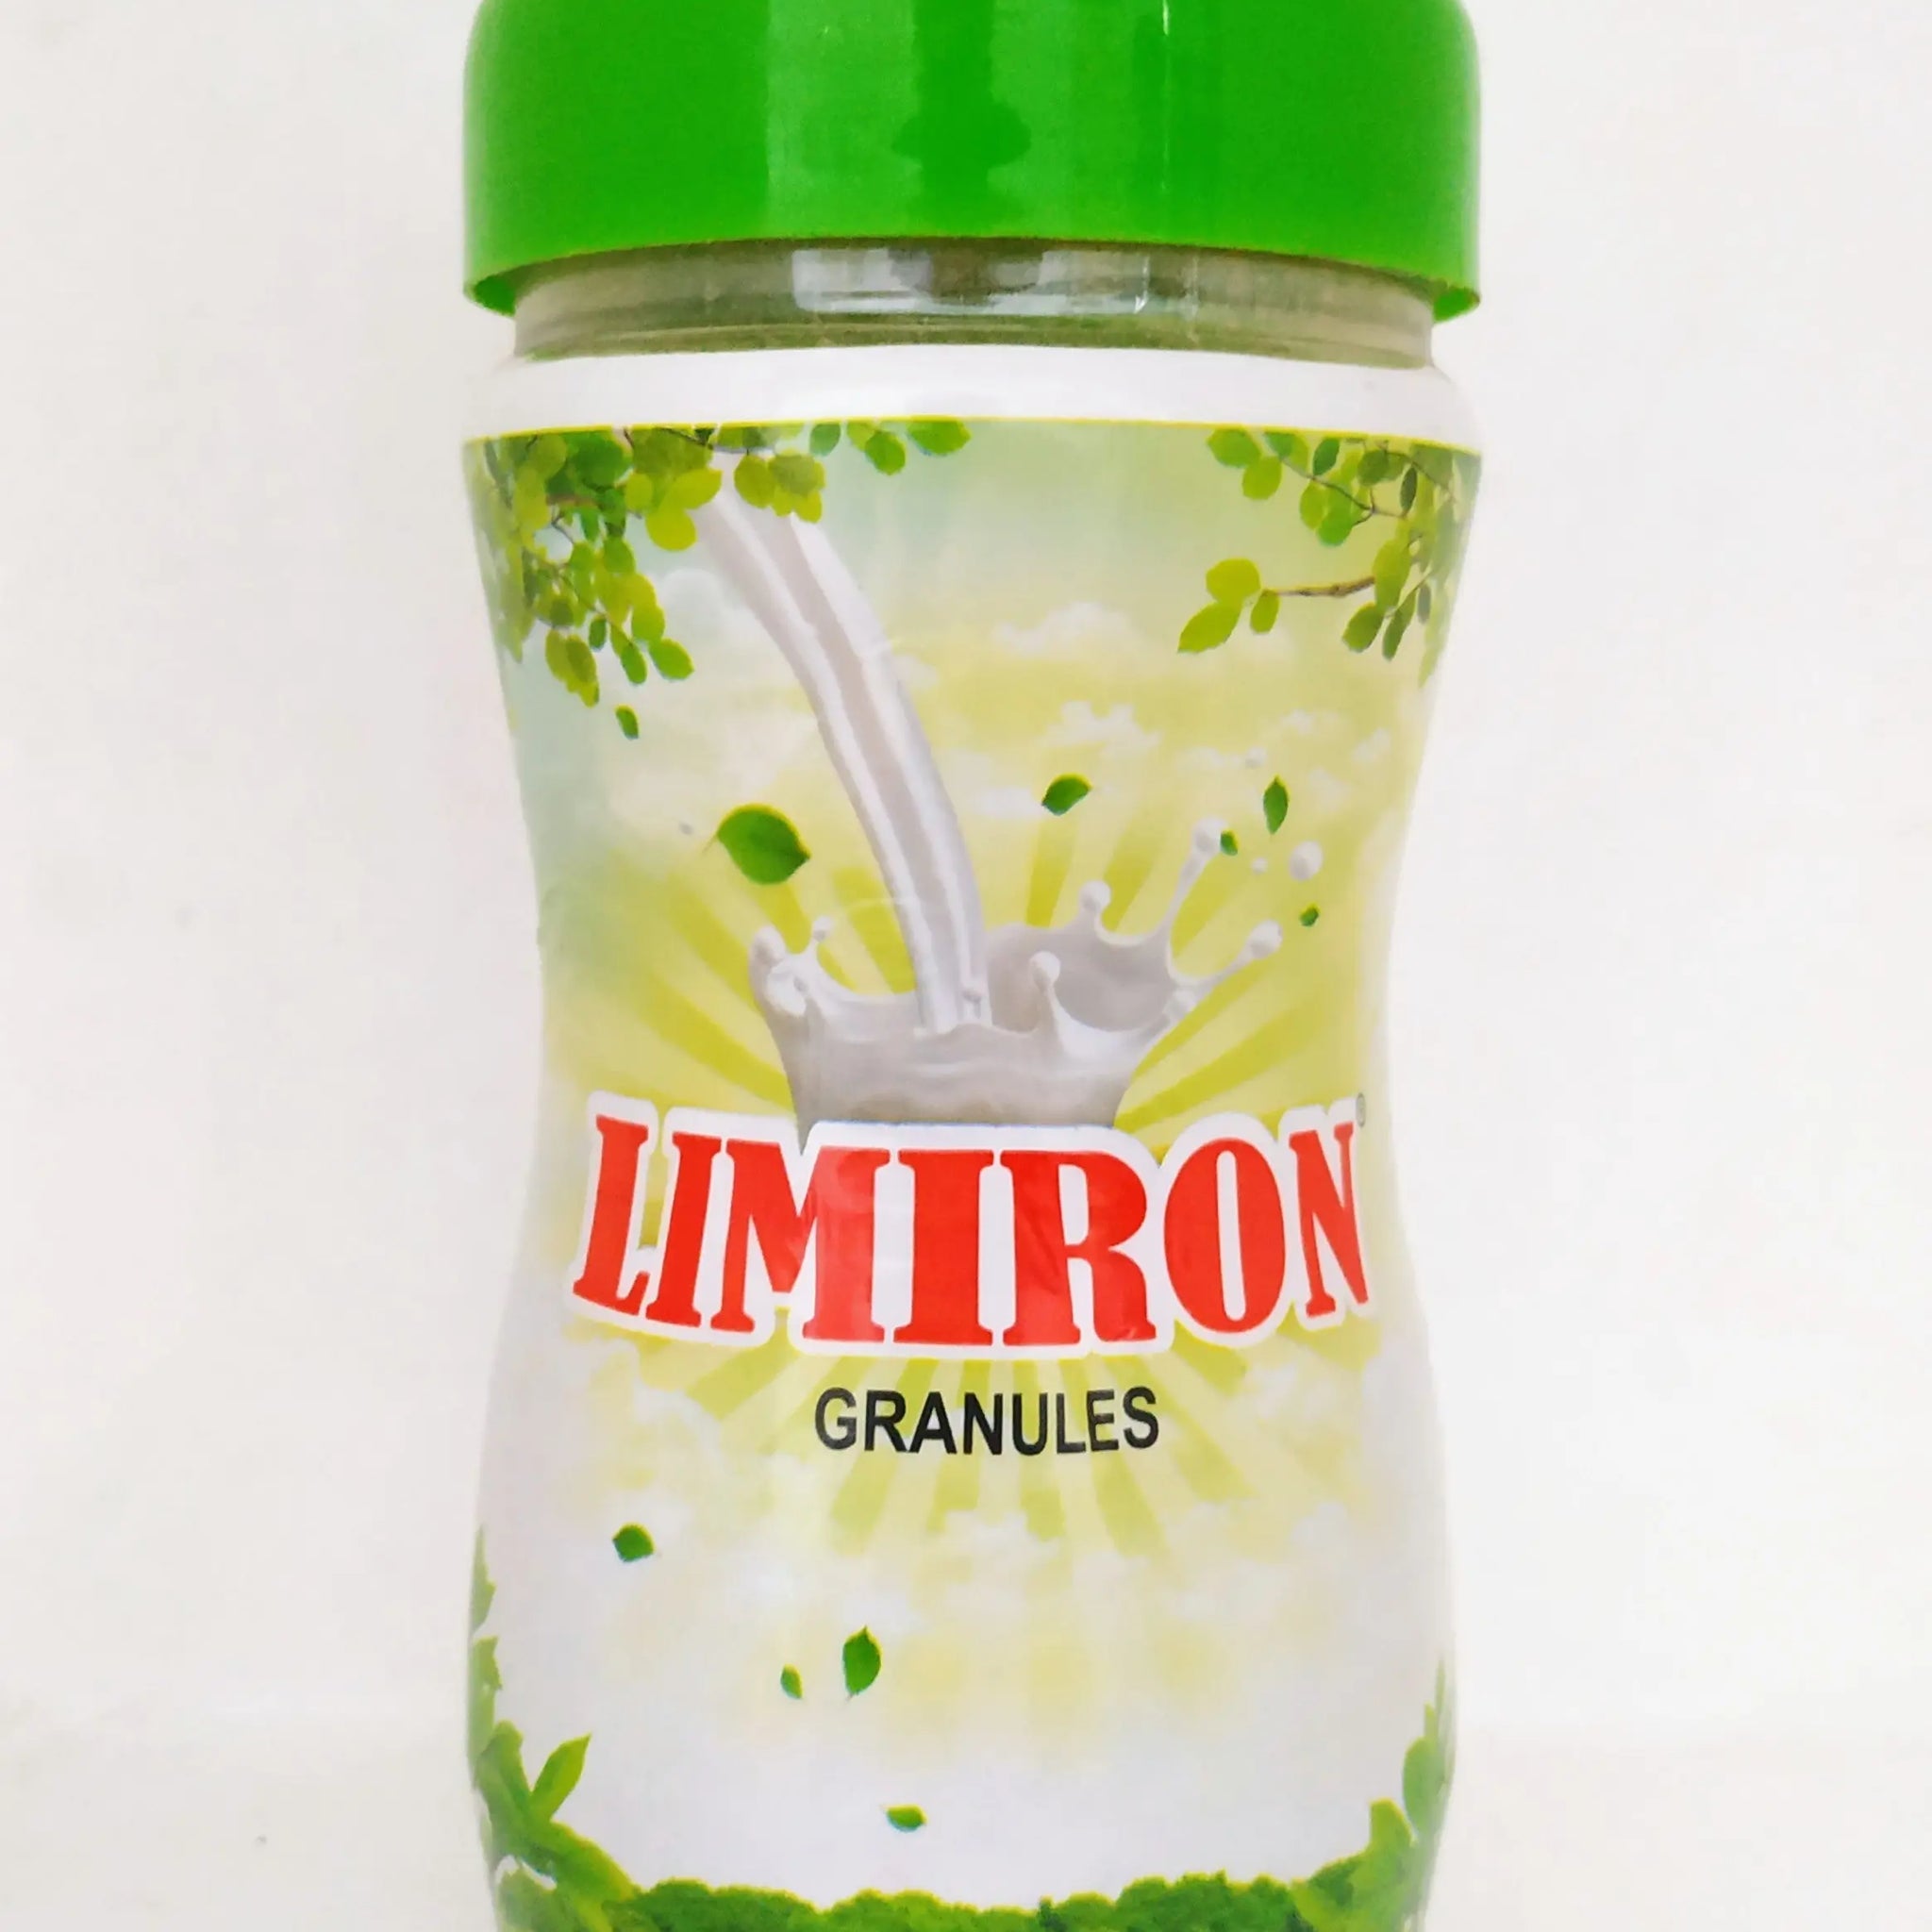 Limiron Granules 300g SG Phyto